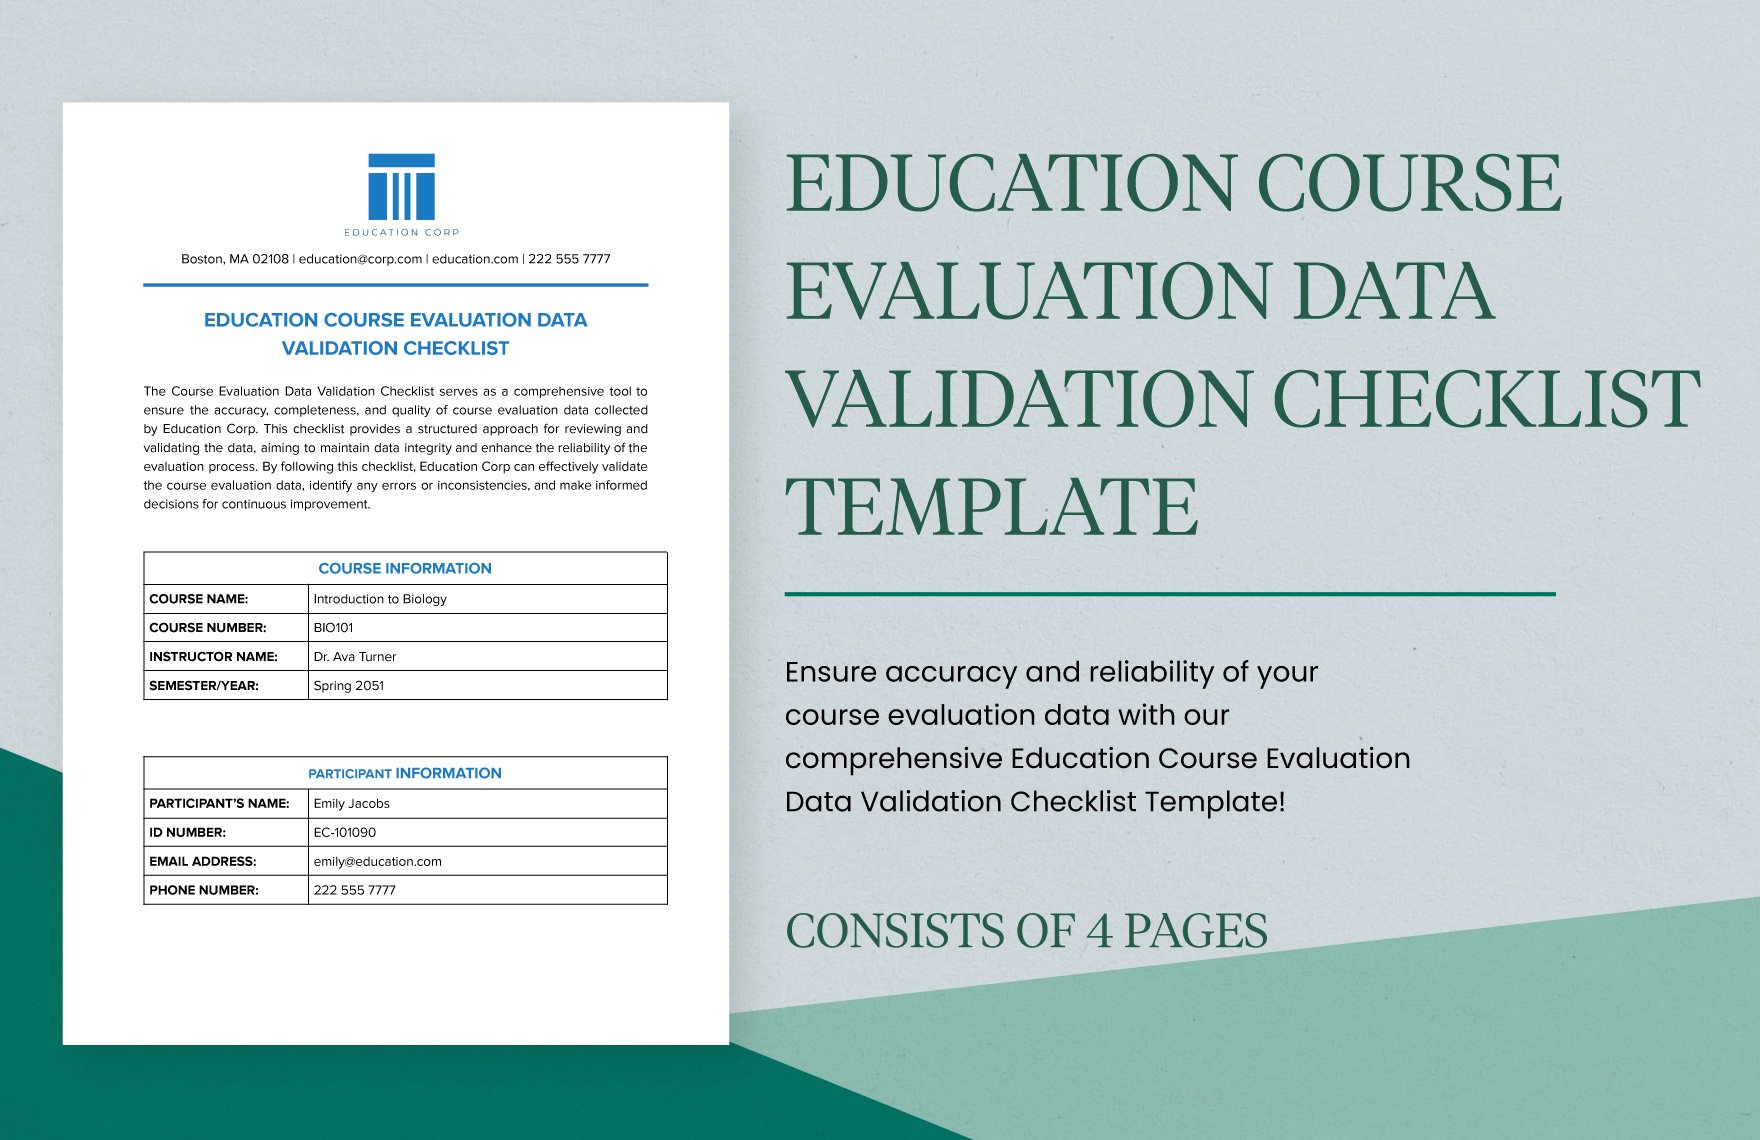 Education Course Evaluation Data Validation Checklist Template in Word, Google Docs, PDF